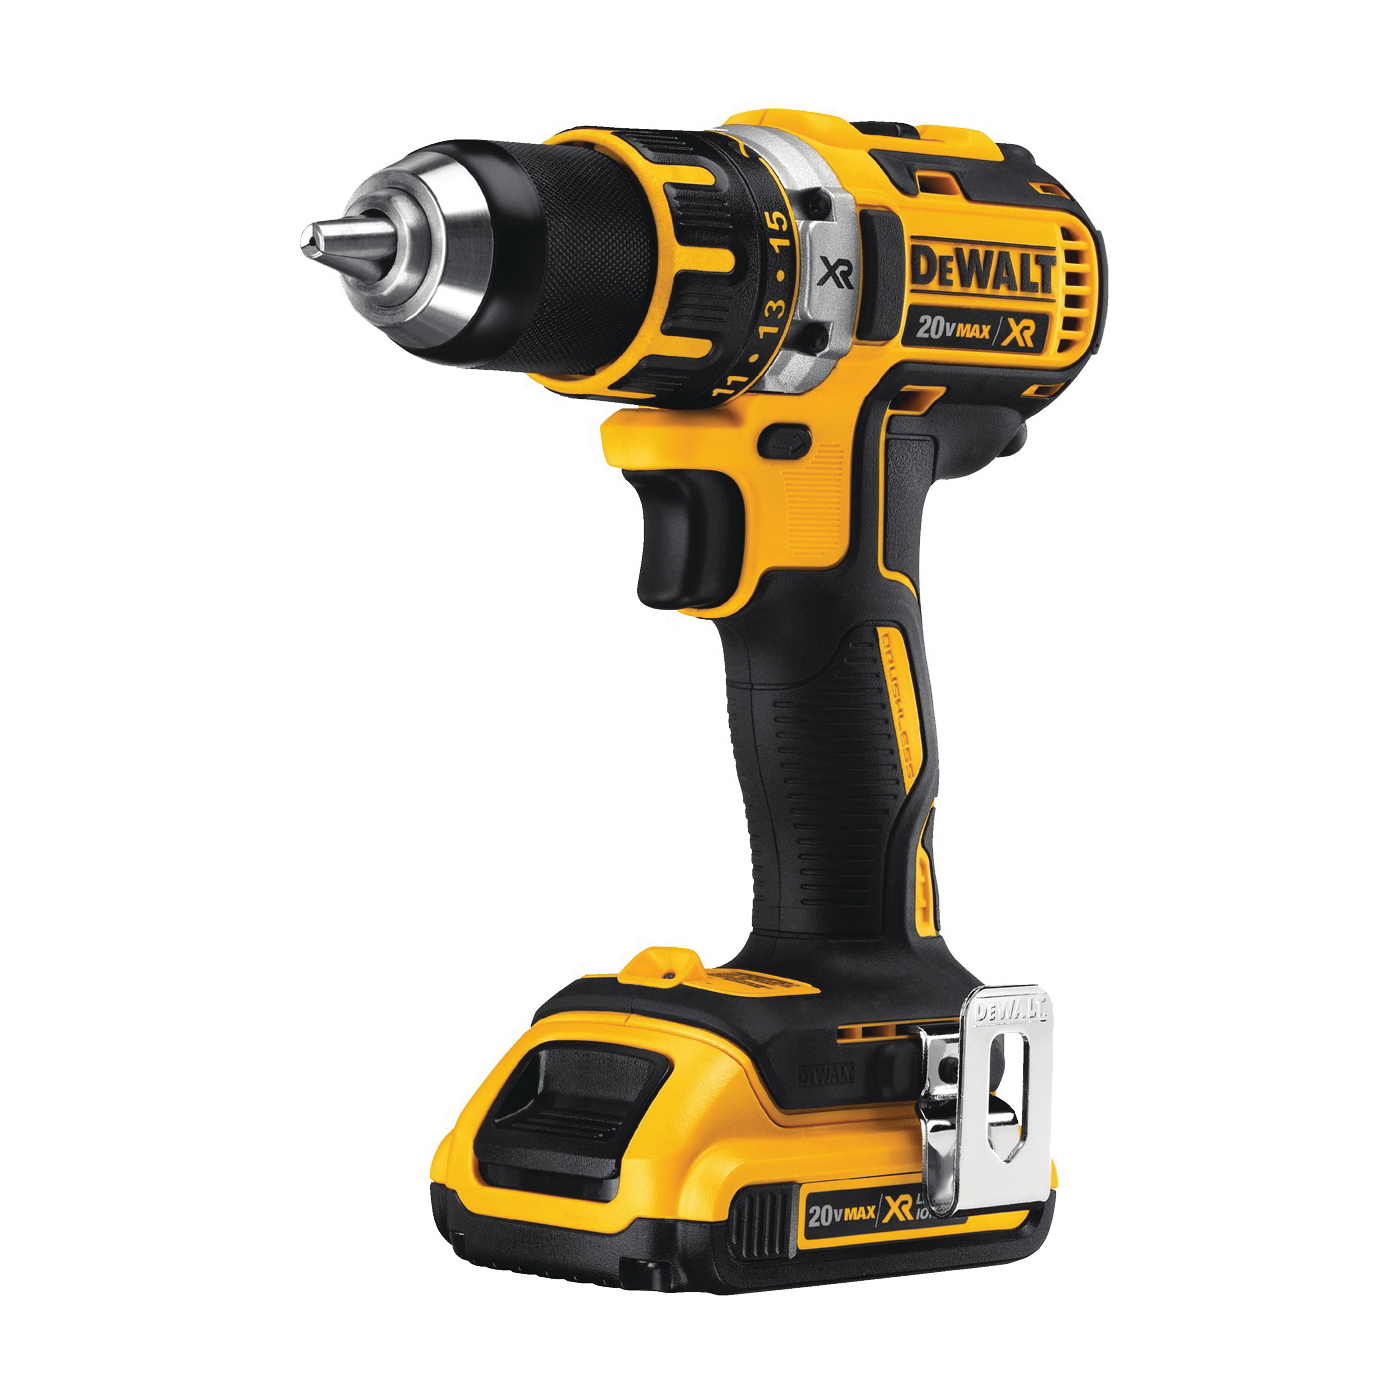 DCD791D2/DCD790D2 Drill/Driver Kit, Battery Included, 20 V, 1/2 in Chuck, Ratcheting Chuck